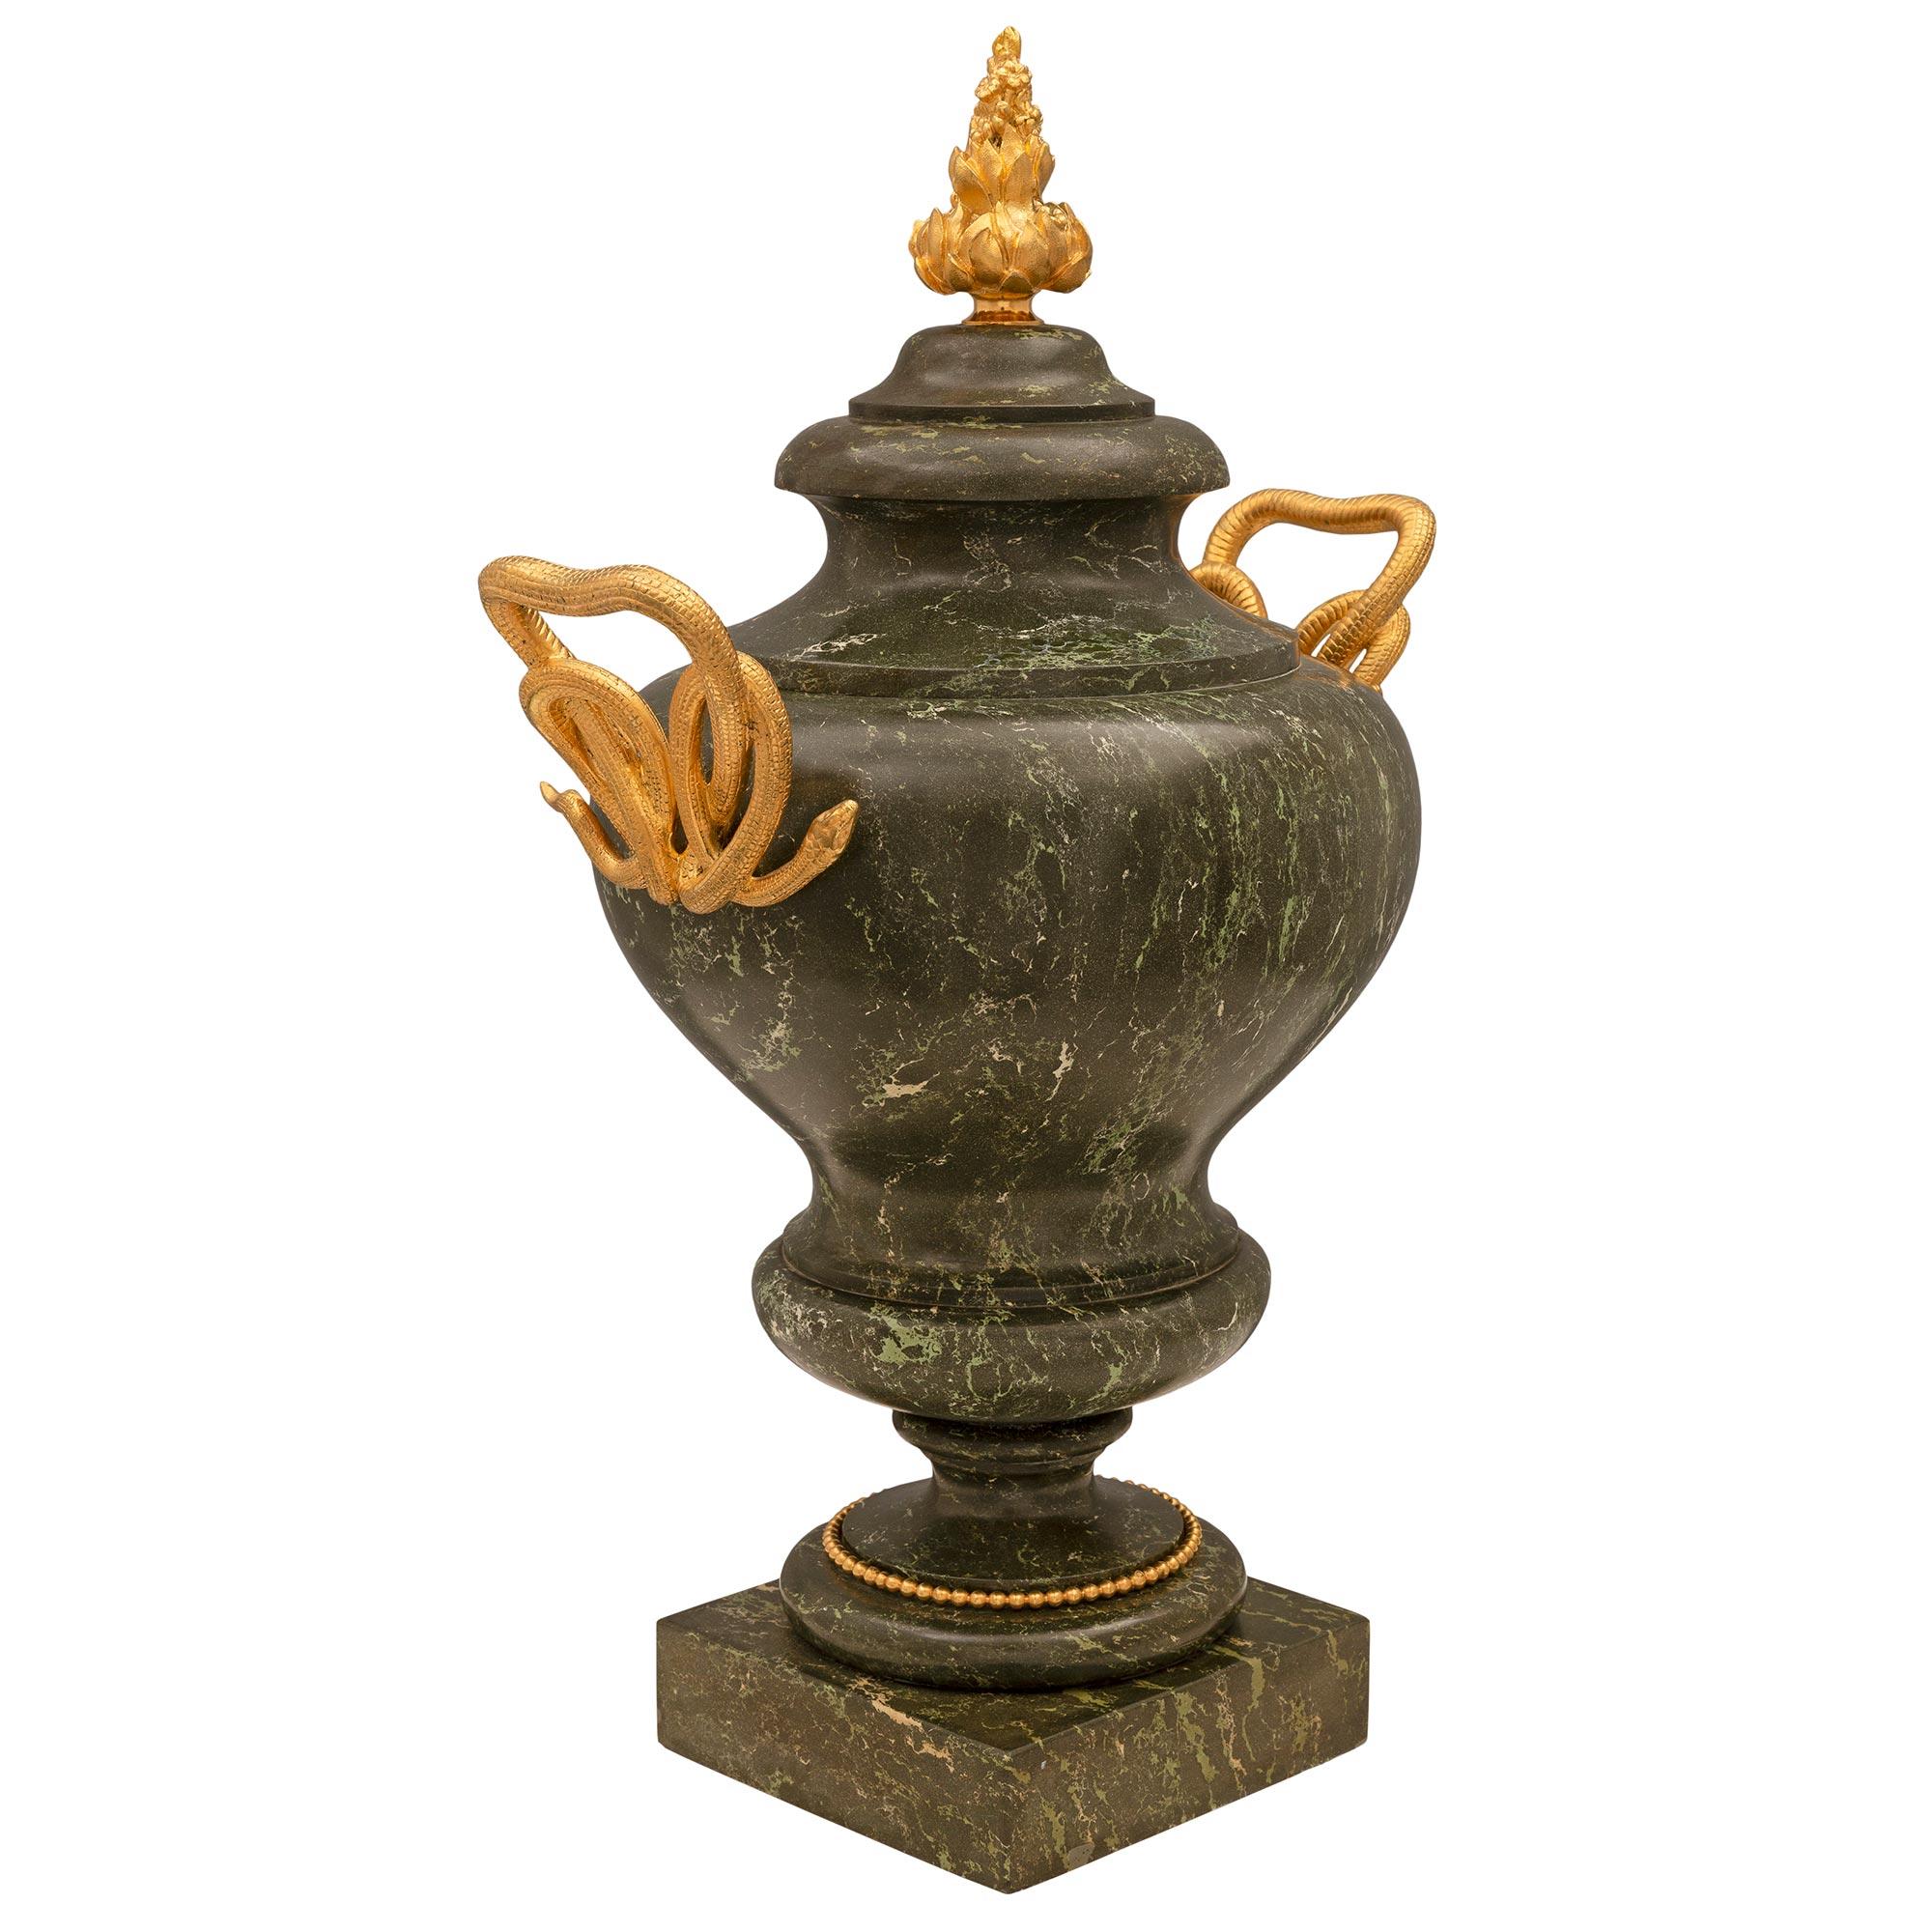 An impressive Italian 19th century Neo-Classical st. Scagliola and ormolu urn. The urn is raised by a square base below the mottled socle shaped pedestal support decorated with a fine beaded wrap around ormolu band. The elegantly shaped scagliola